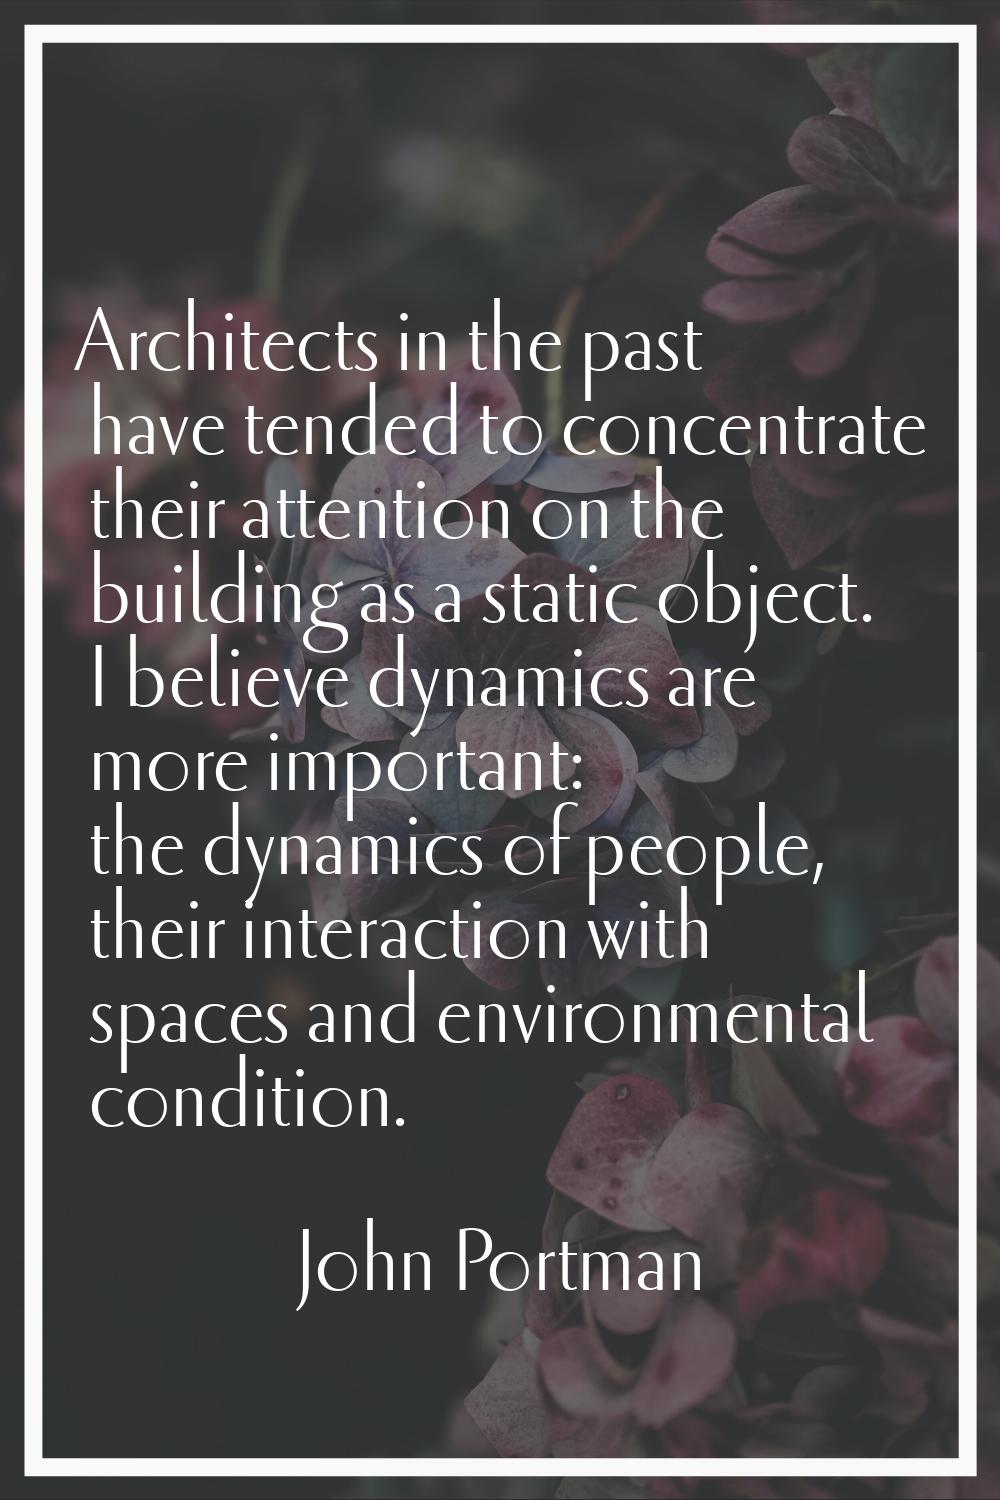 Architects in the past have tended to concentrate their attention on the building as a static objec